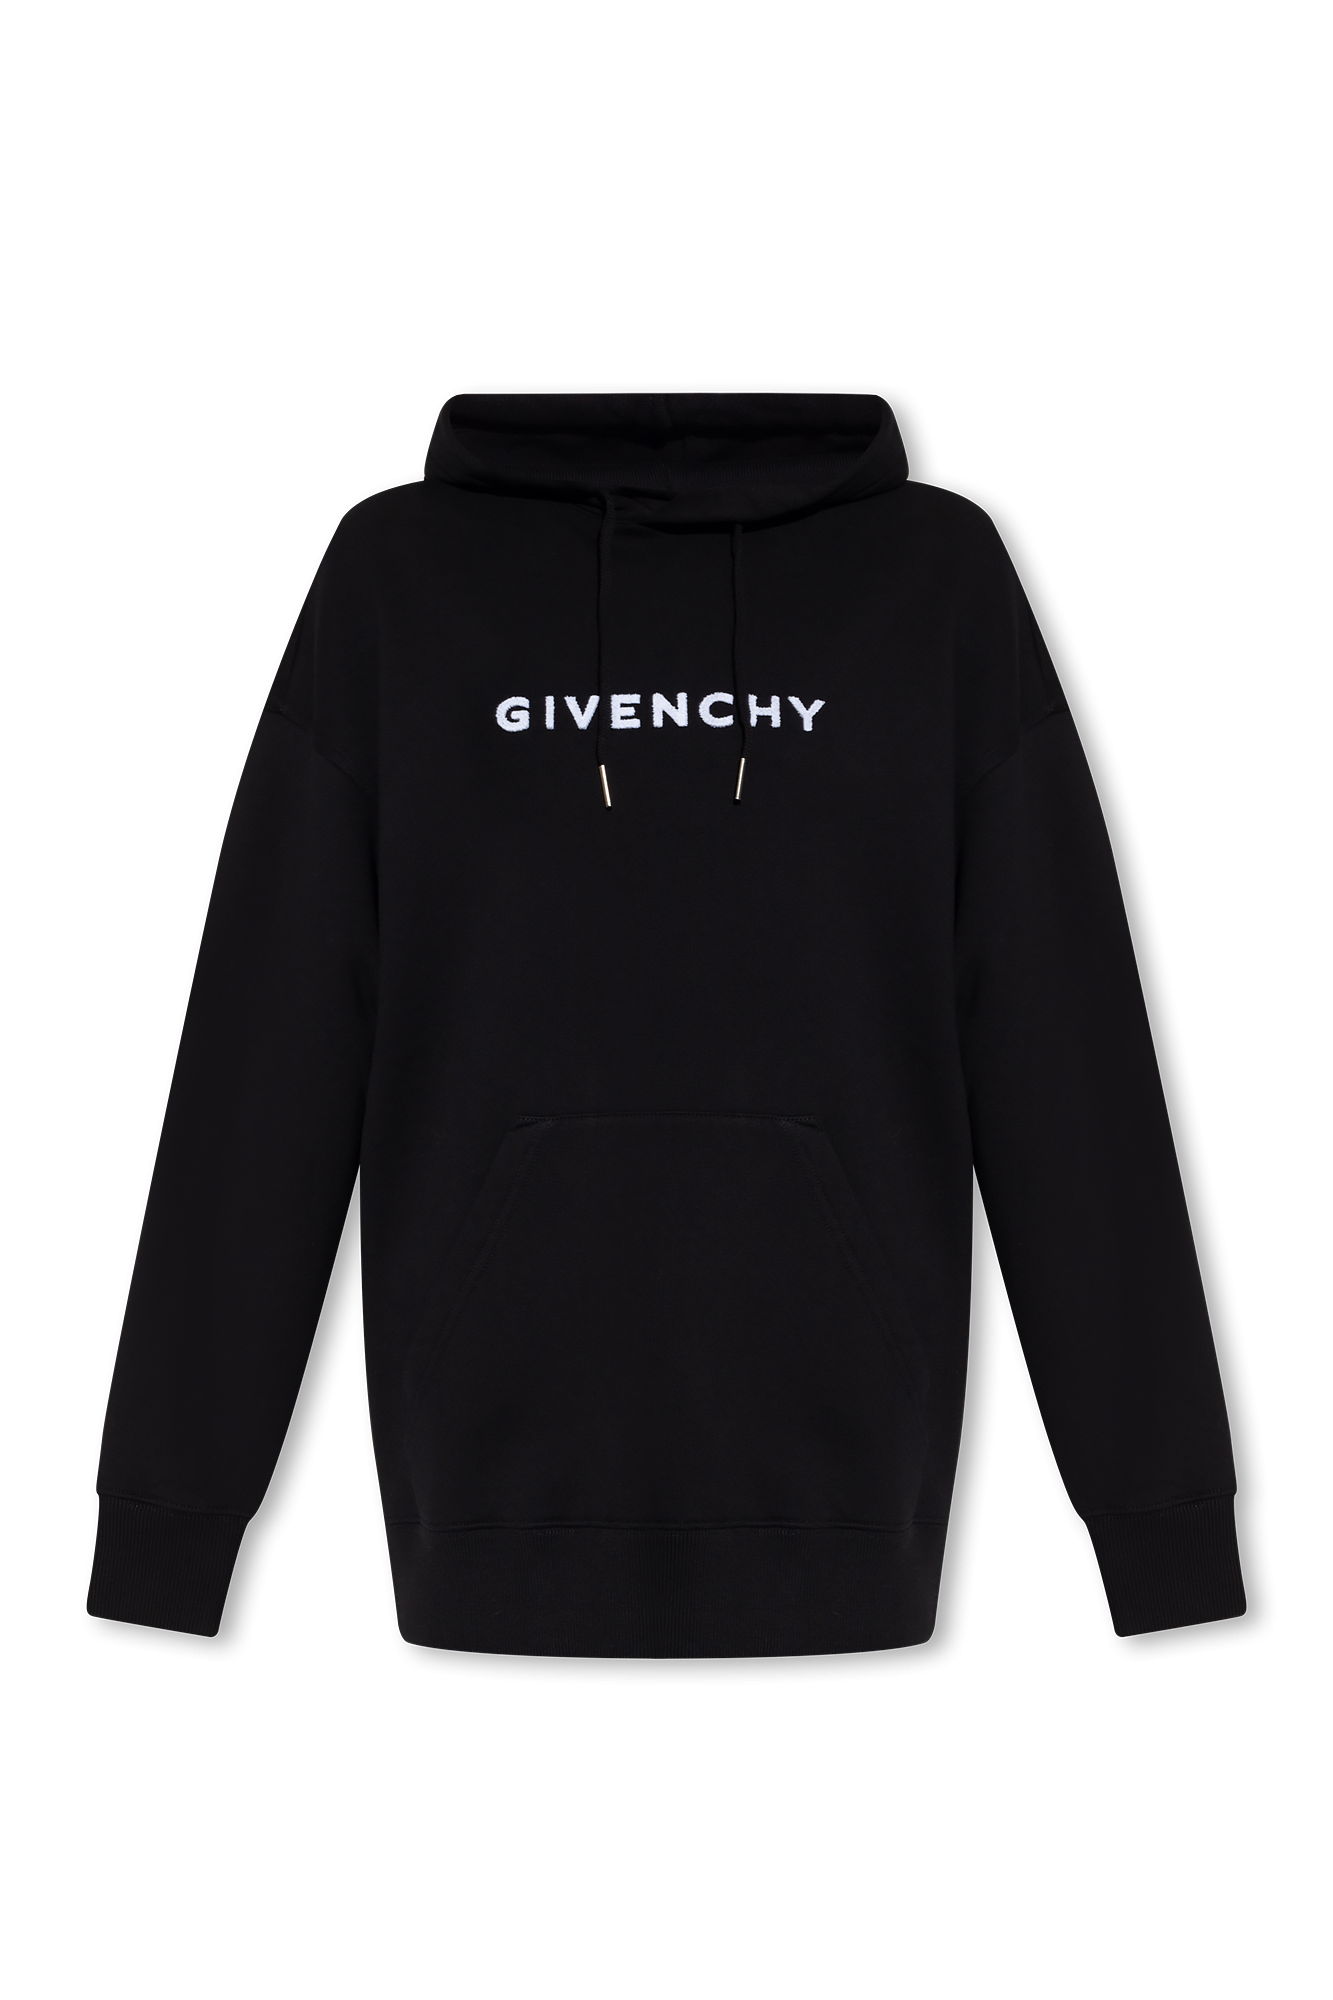 Givenchy MEN KNITWEAR HEAVY KNIT - Black hoodie with logo givenchy